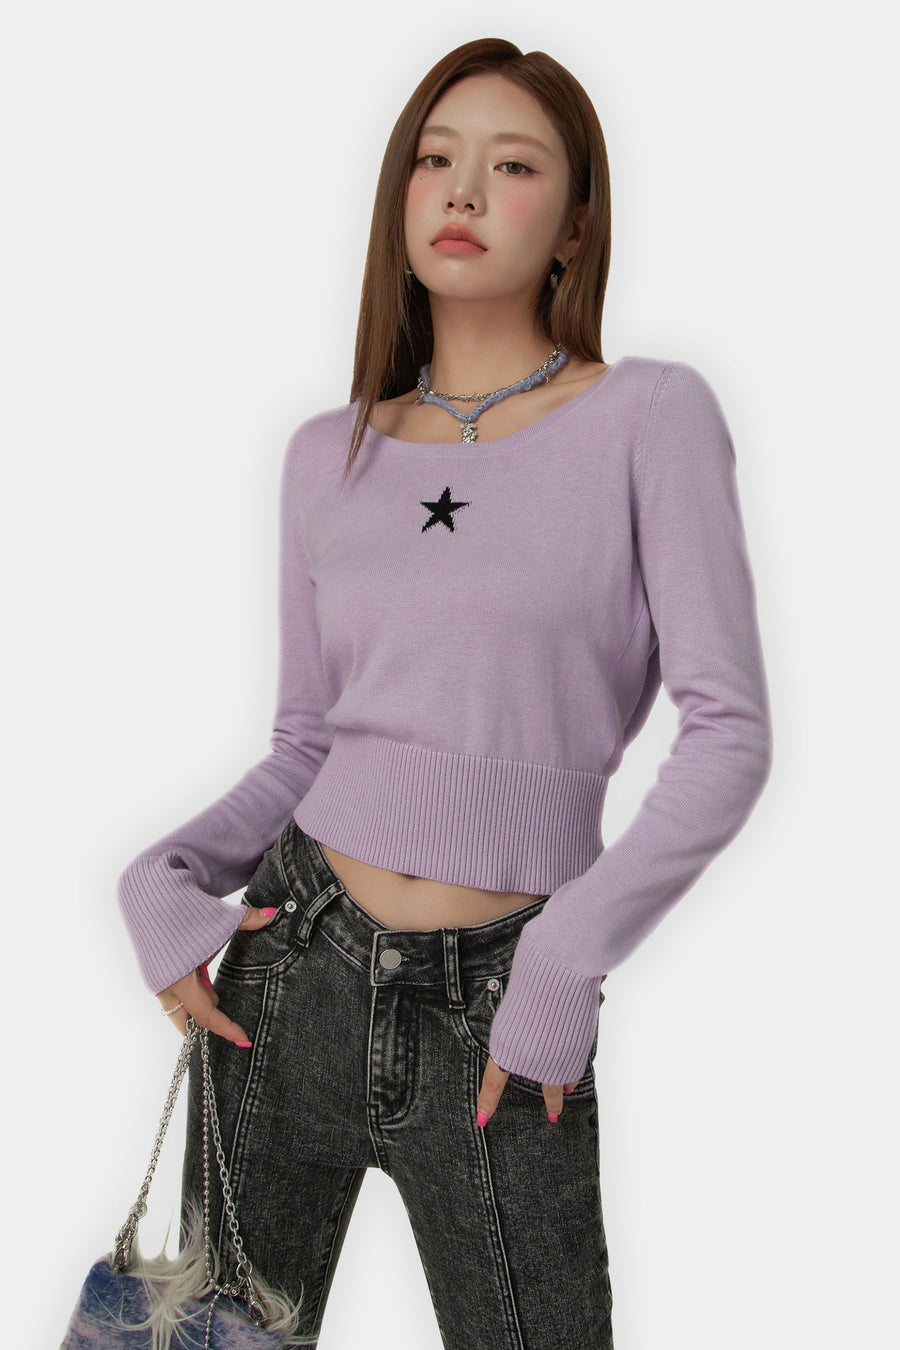 CHUU You Are A Star Hooded Sweater